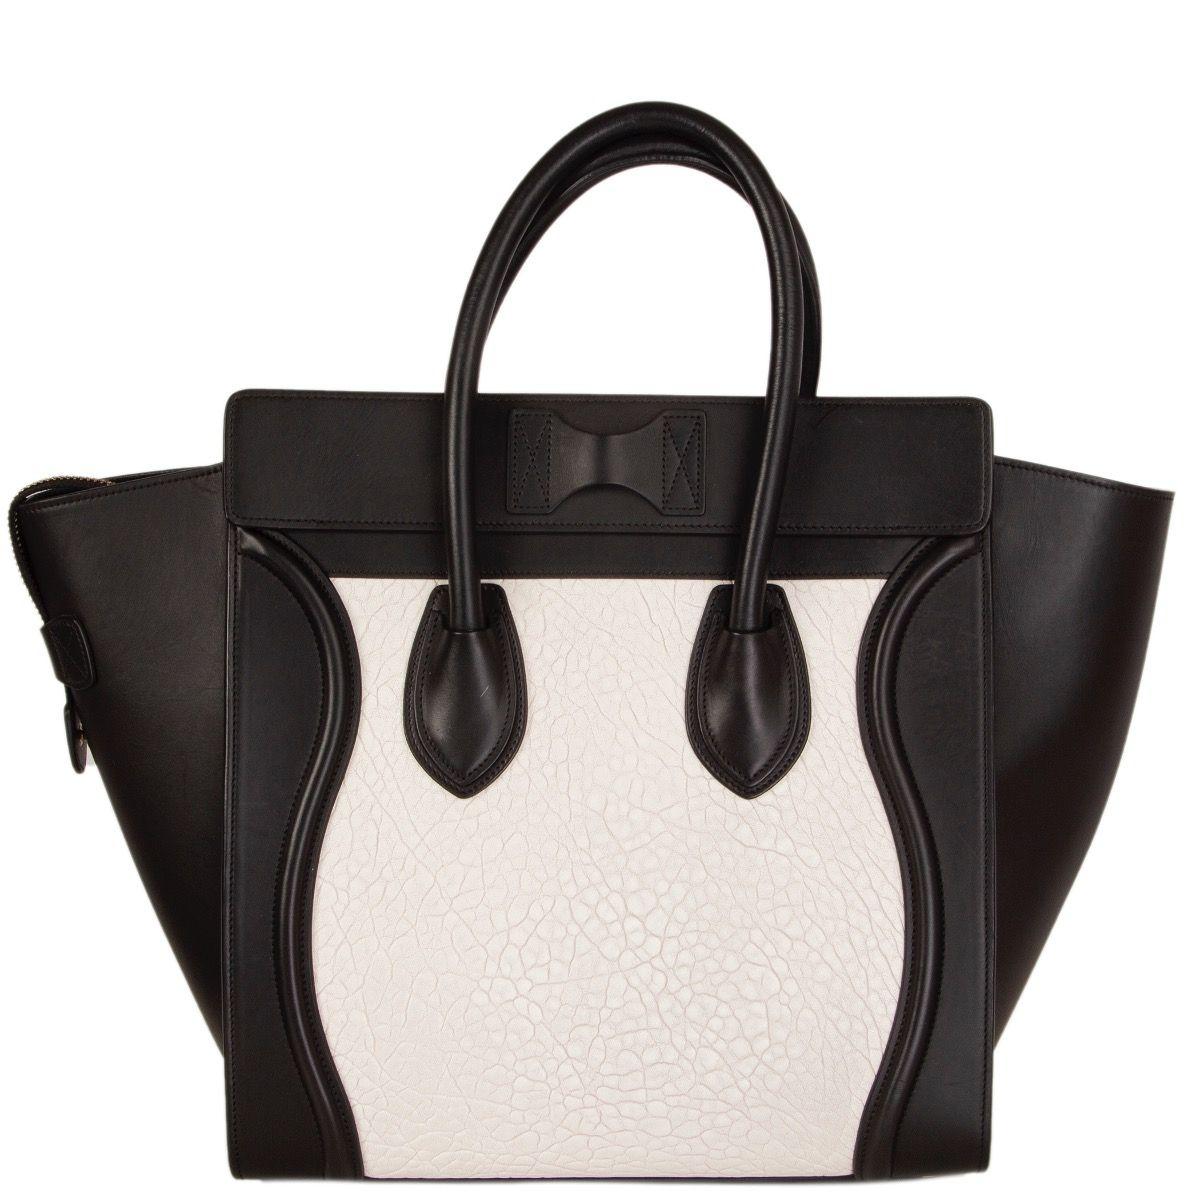 CELINE black and white leather MINI LUGGAGE Tote Shoulder Bag at ...